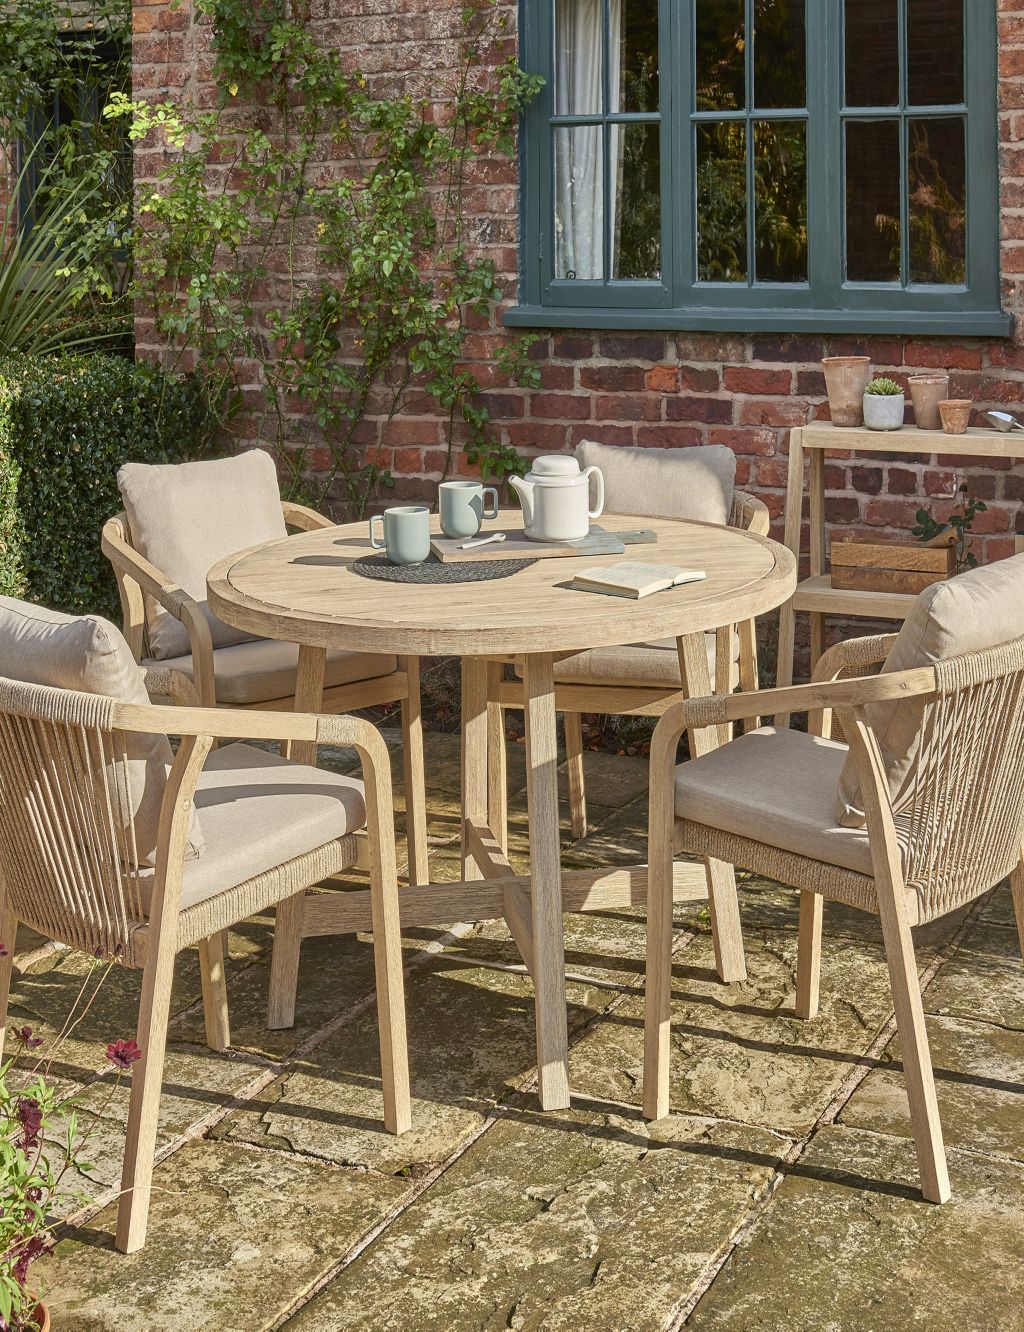 Cora 4 Seater Garden Dining Table & Chairs